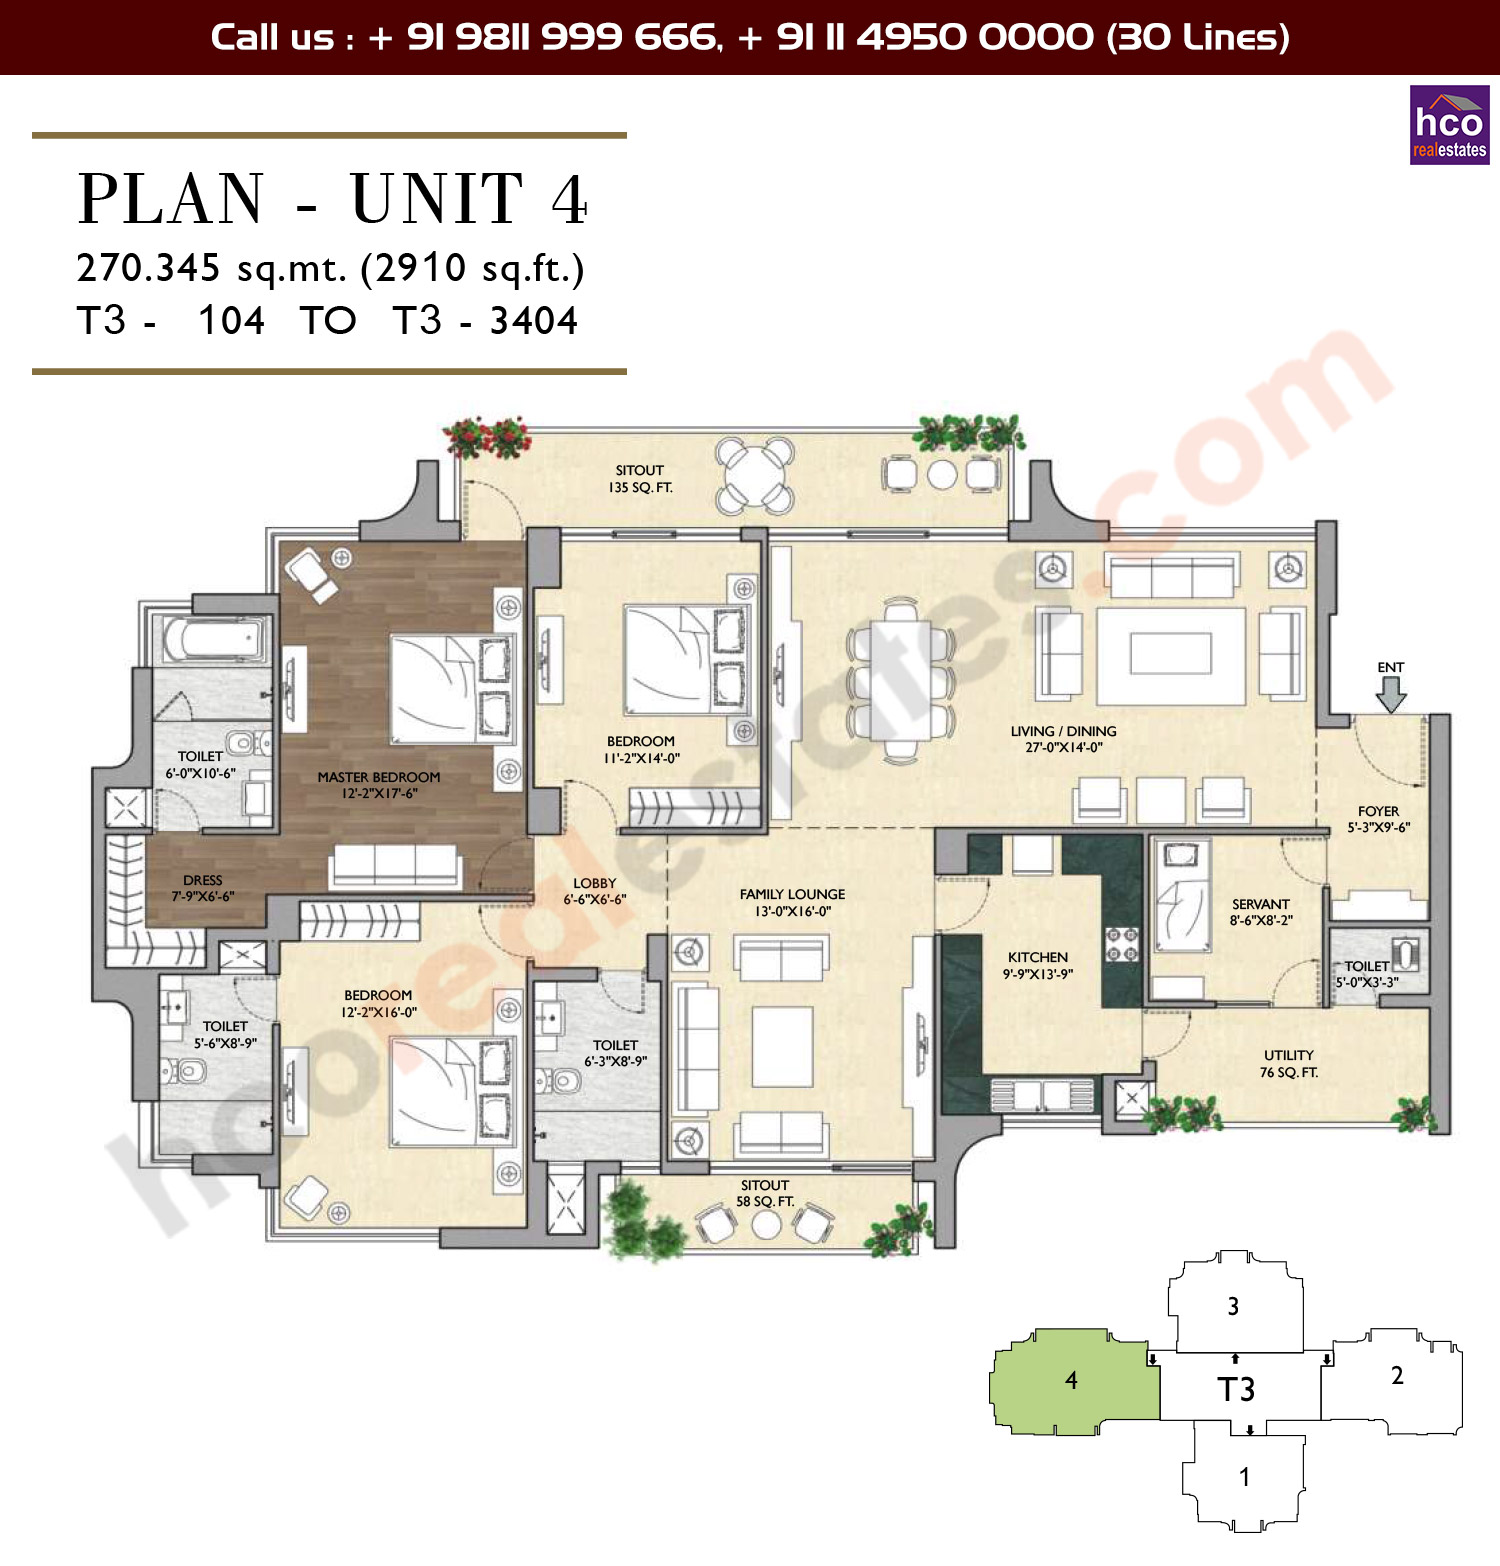 Unit 4, 3 BHK + Servant + Family Lounge + Utility + Living / Dining + Sitout: 2910 Sq.Ft.